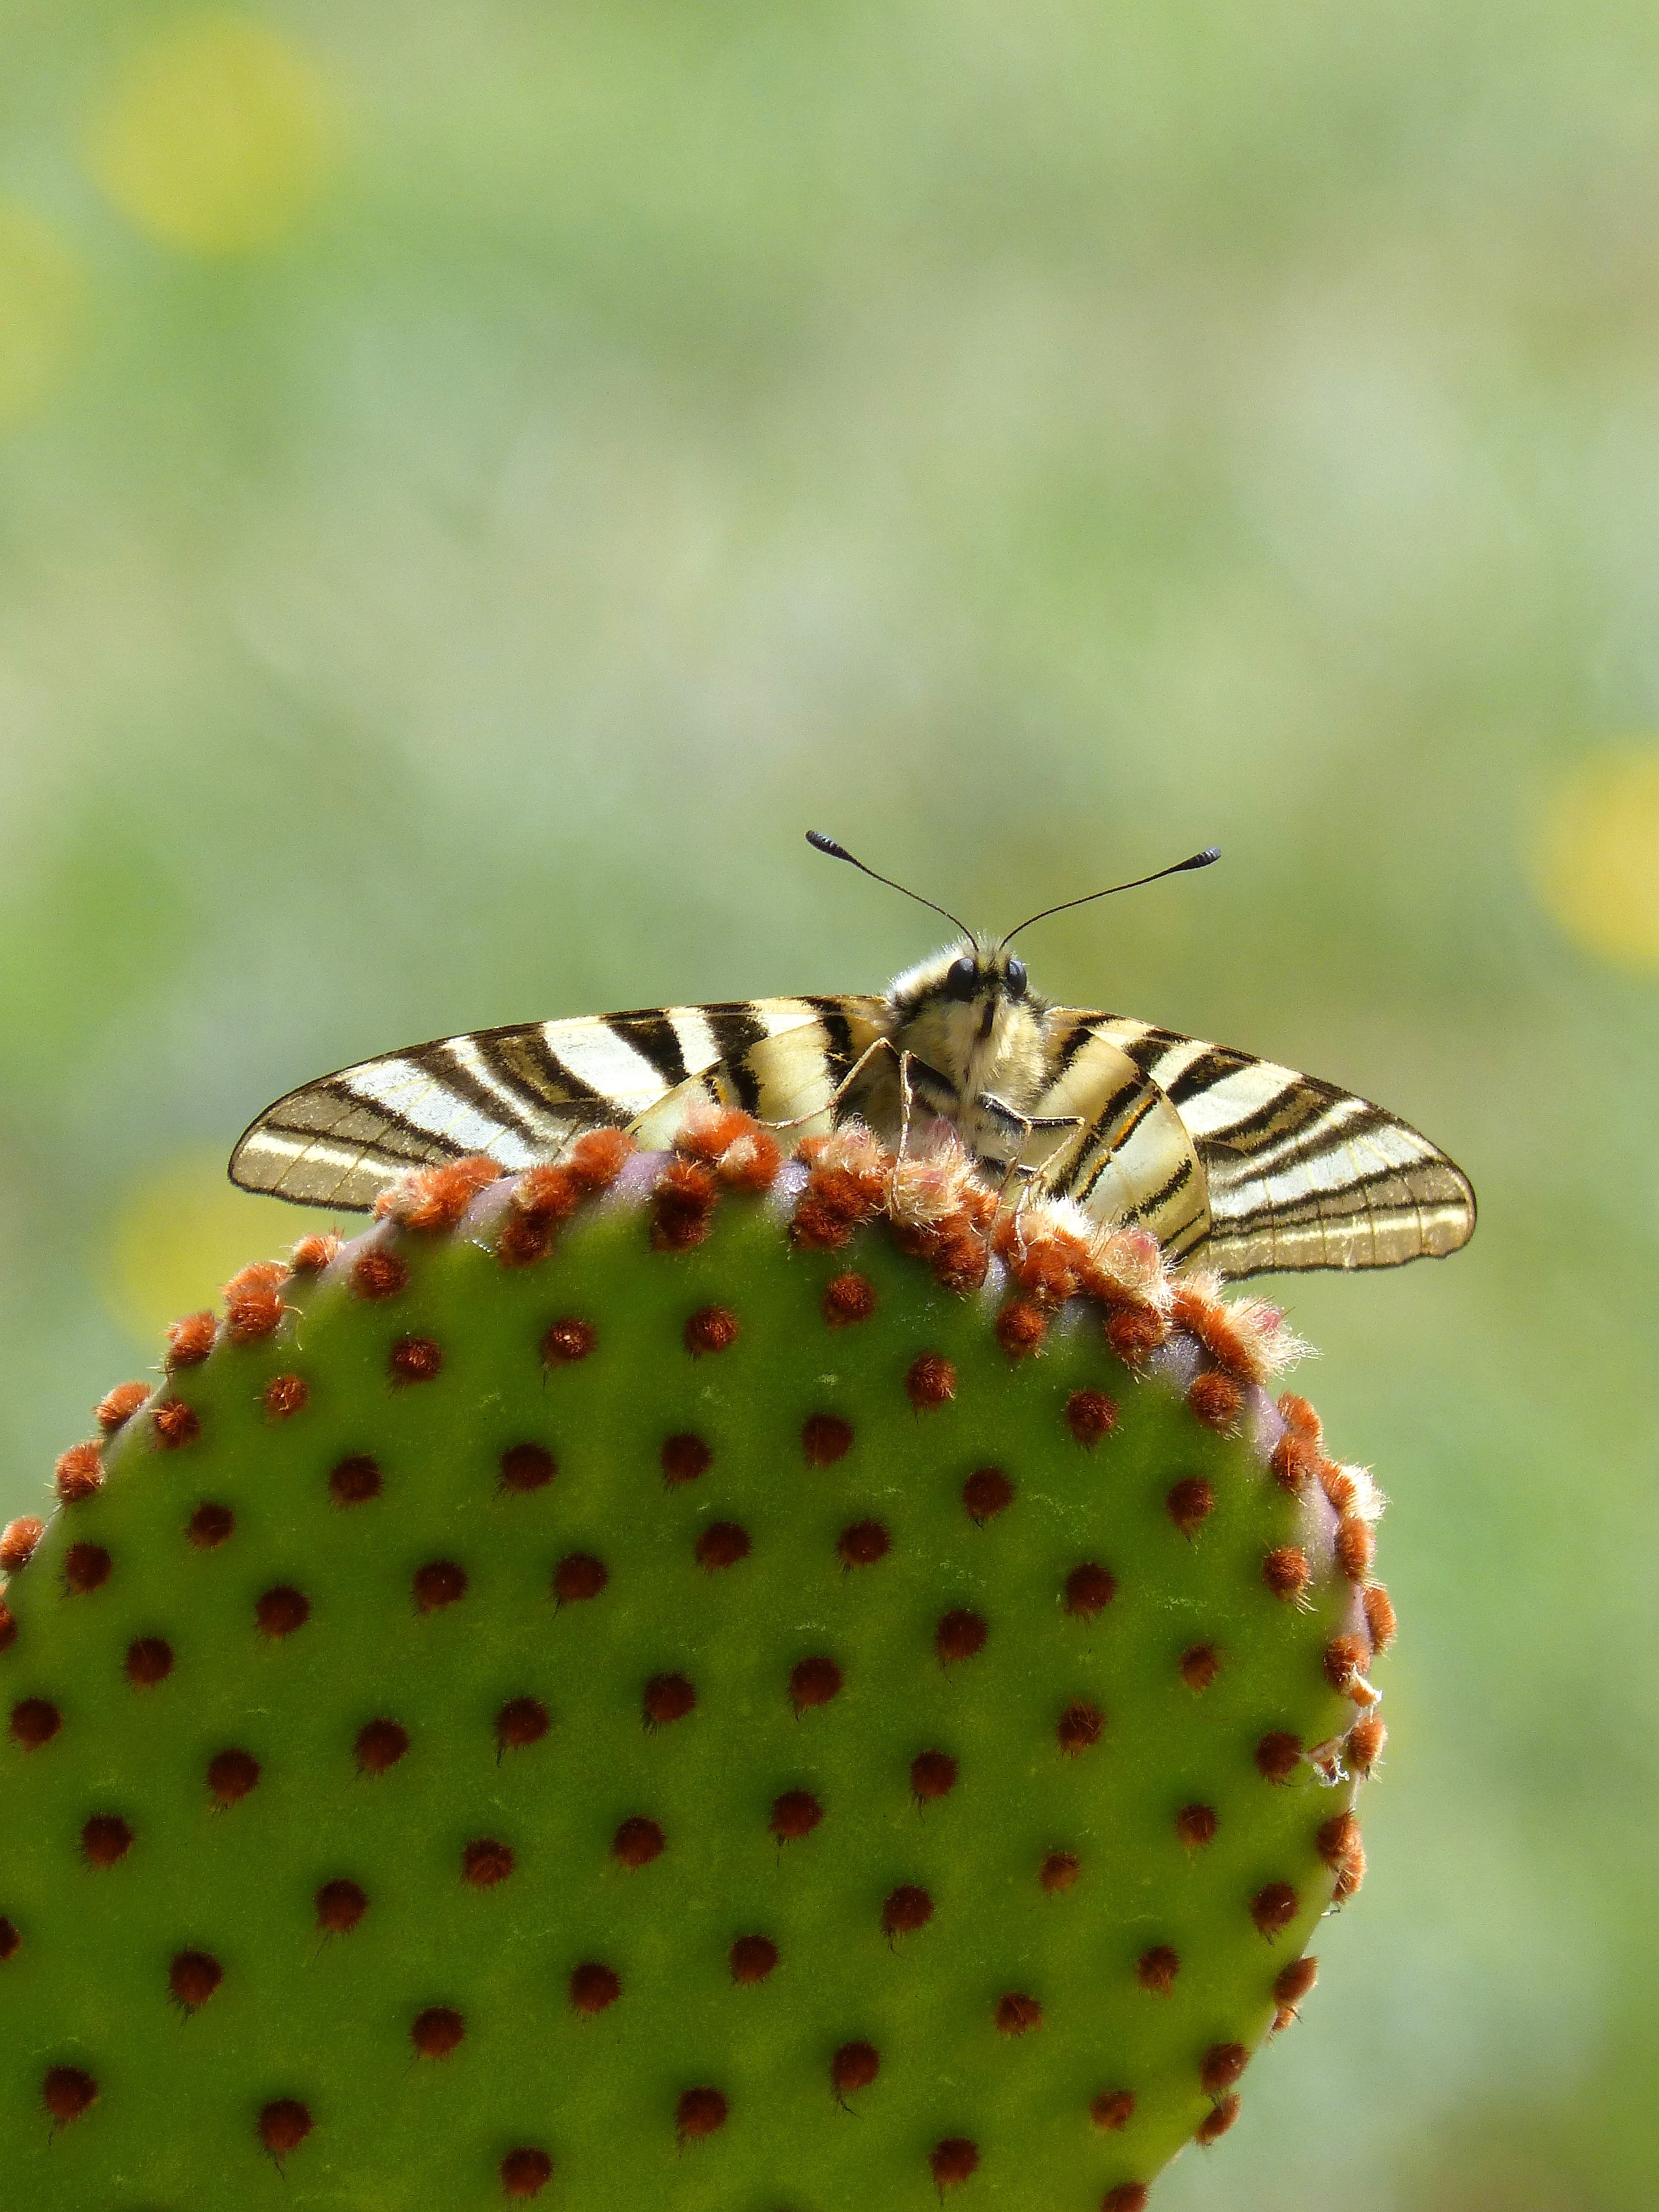 Butterfly Queen, Cactus, Machaon, insect, green color